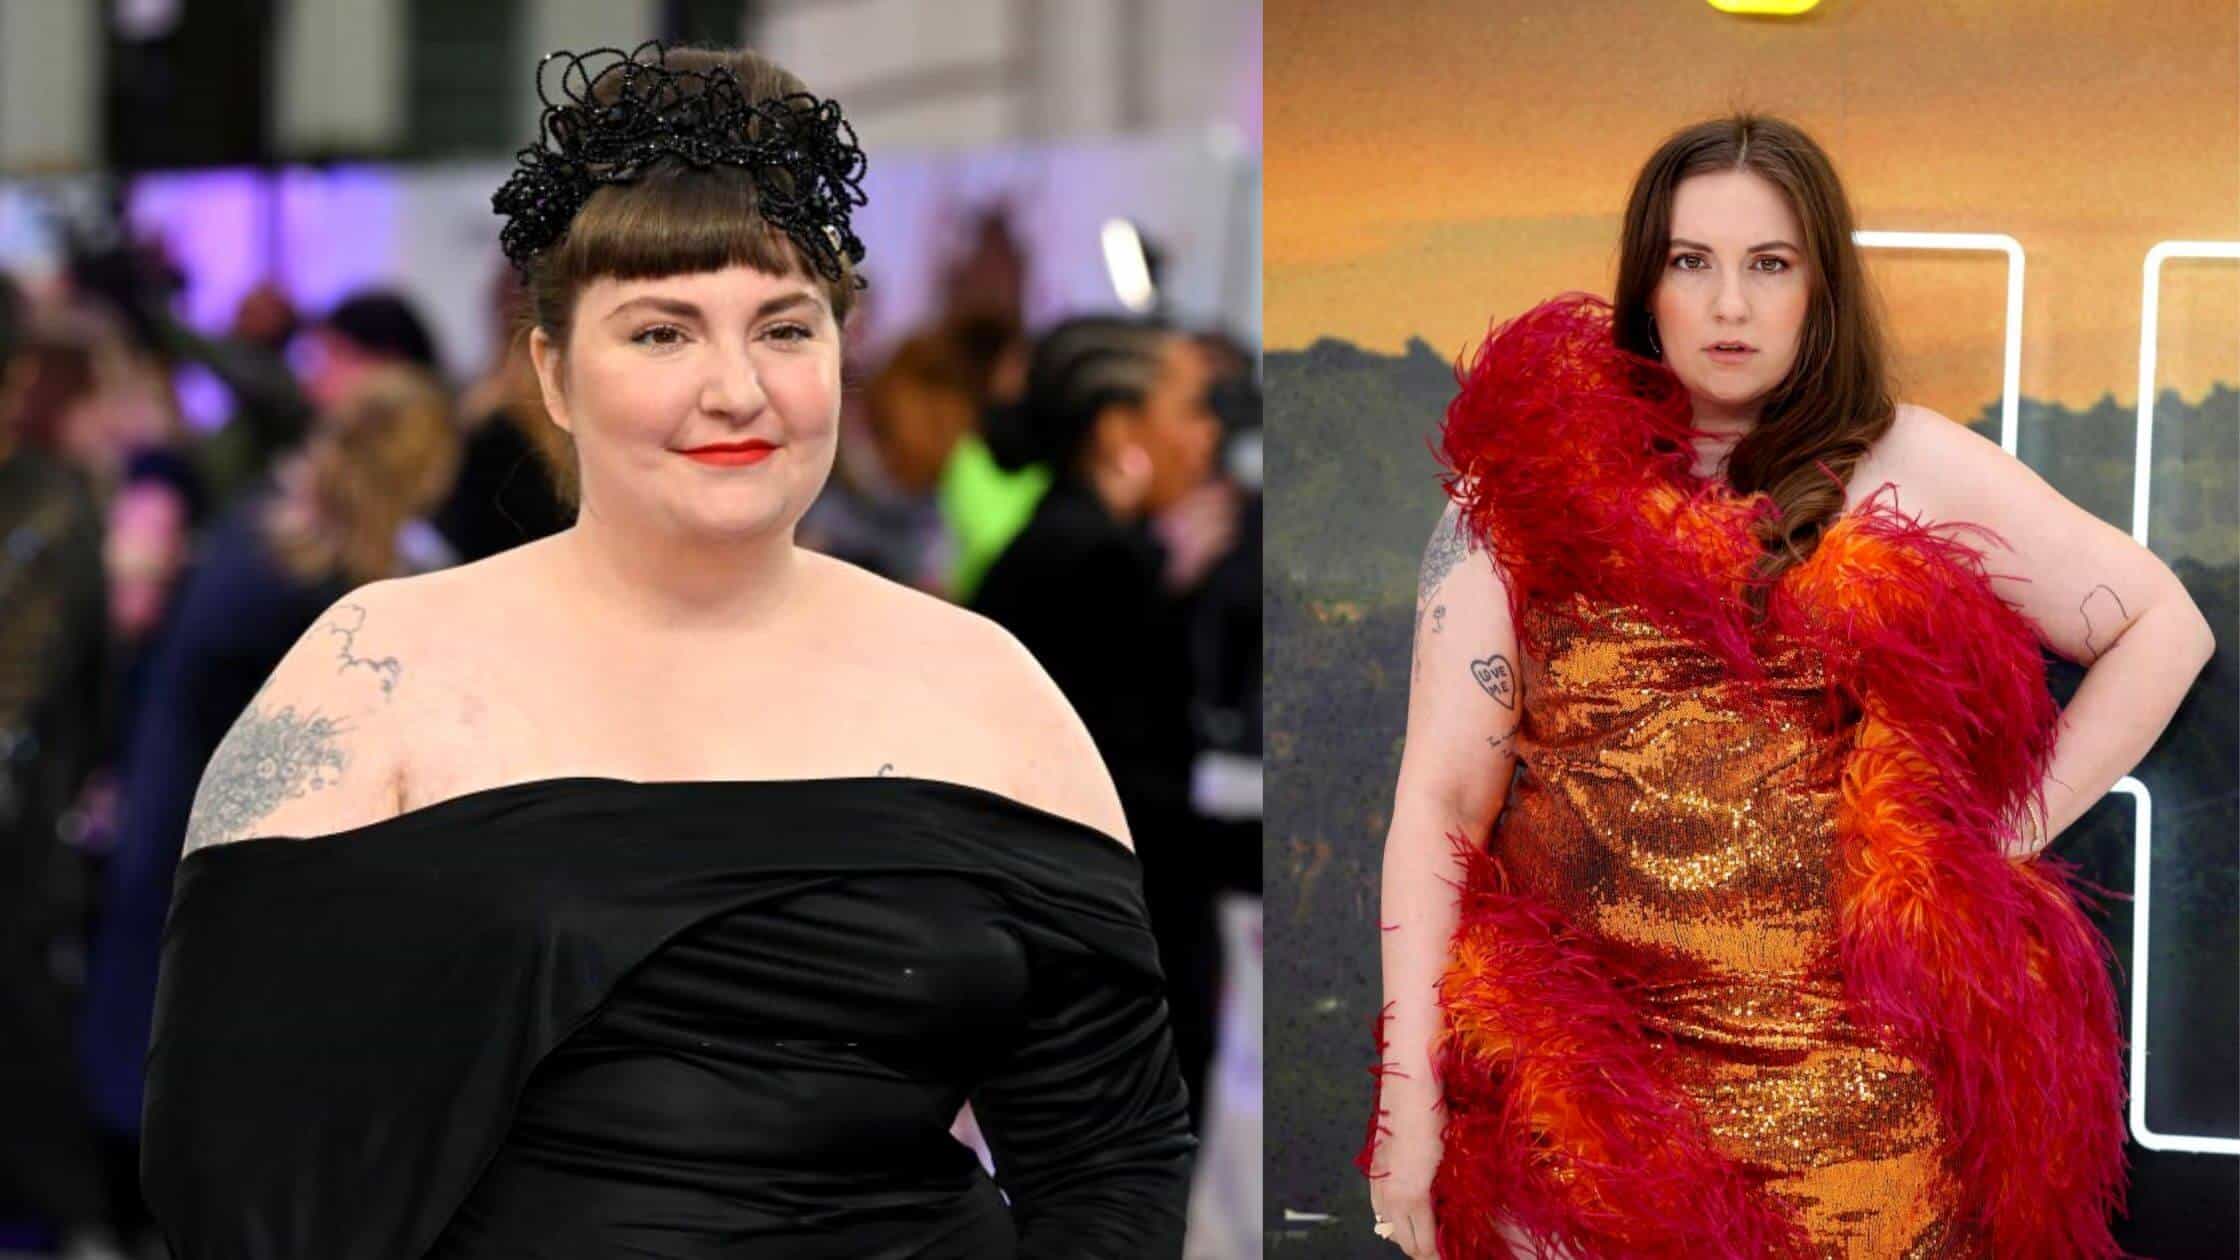  Lena Dunham Was Criticized For Her Body In Her 20s